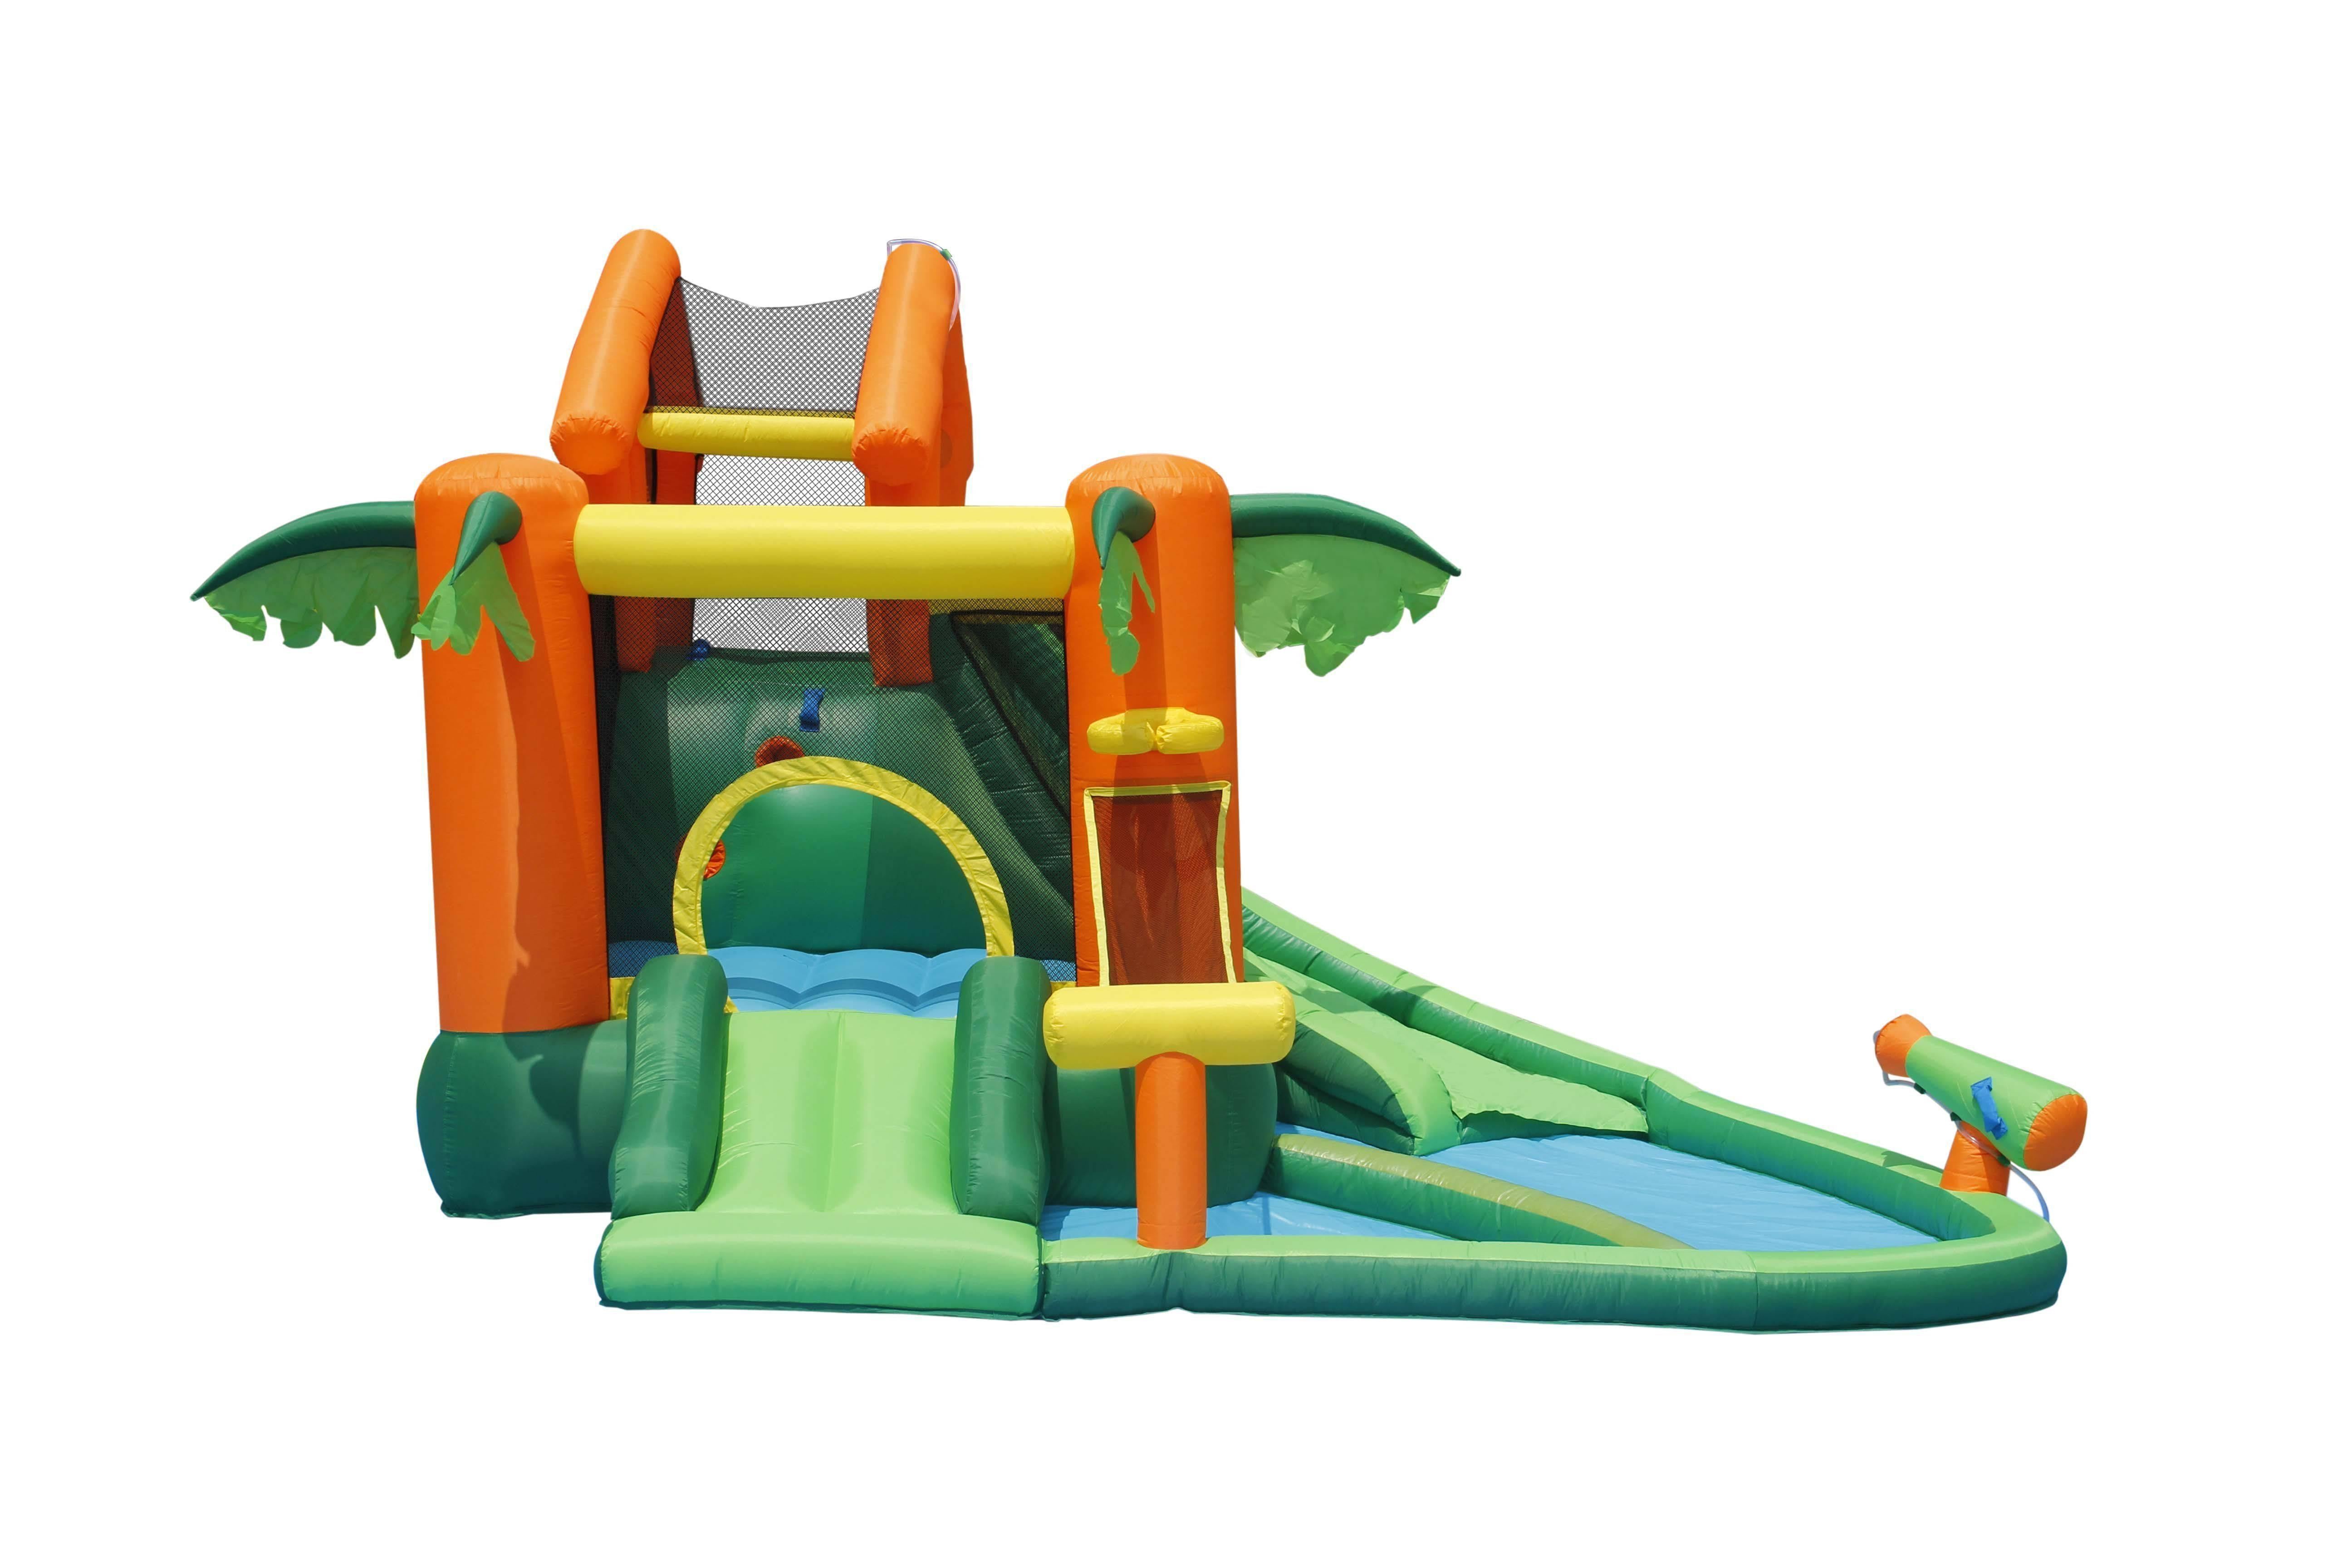 Tropical Play Centre - DTI Direct Canada